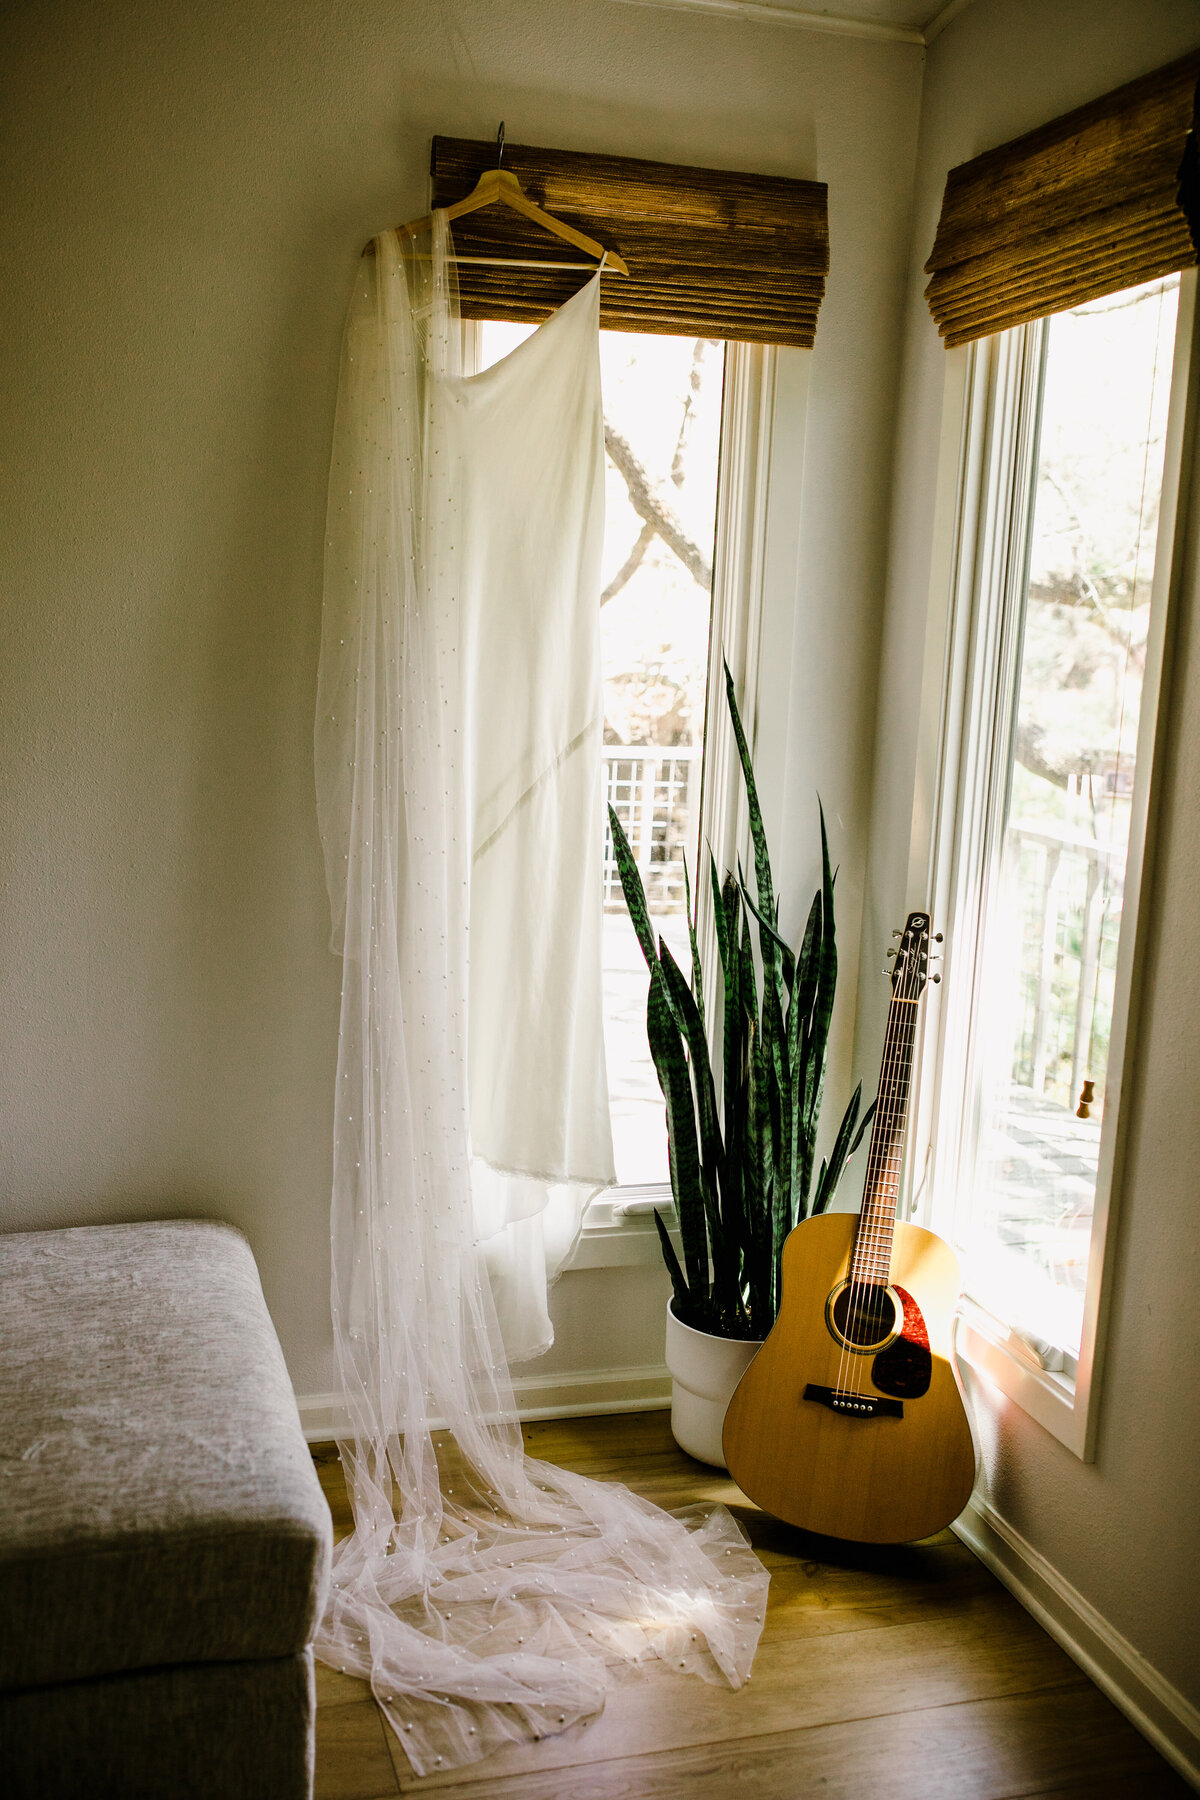 Wedding dress hanging from window next to snake plant and guitar